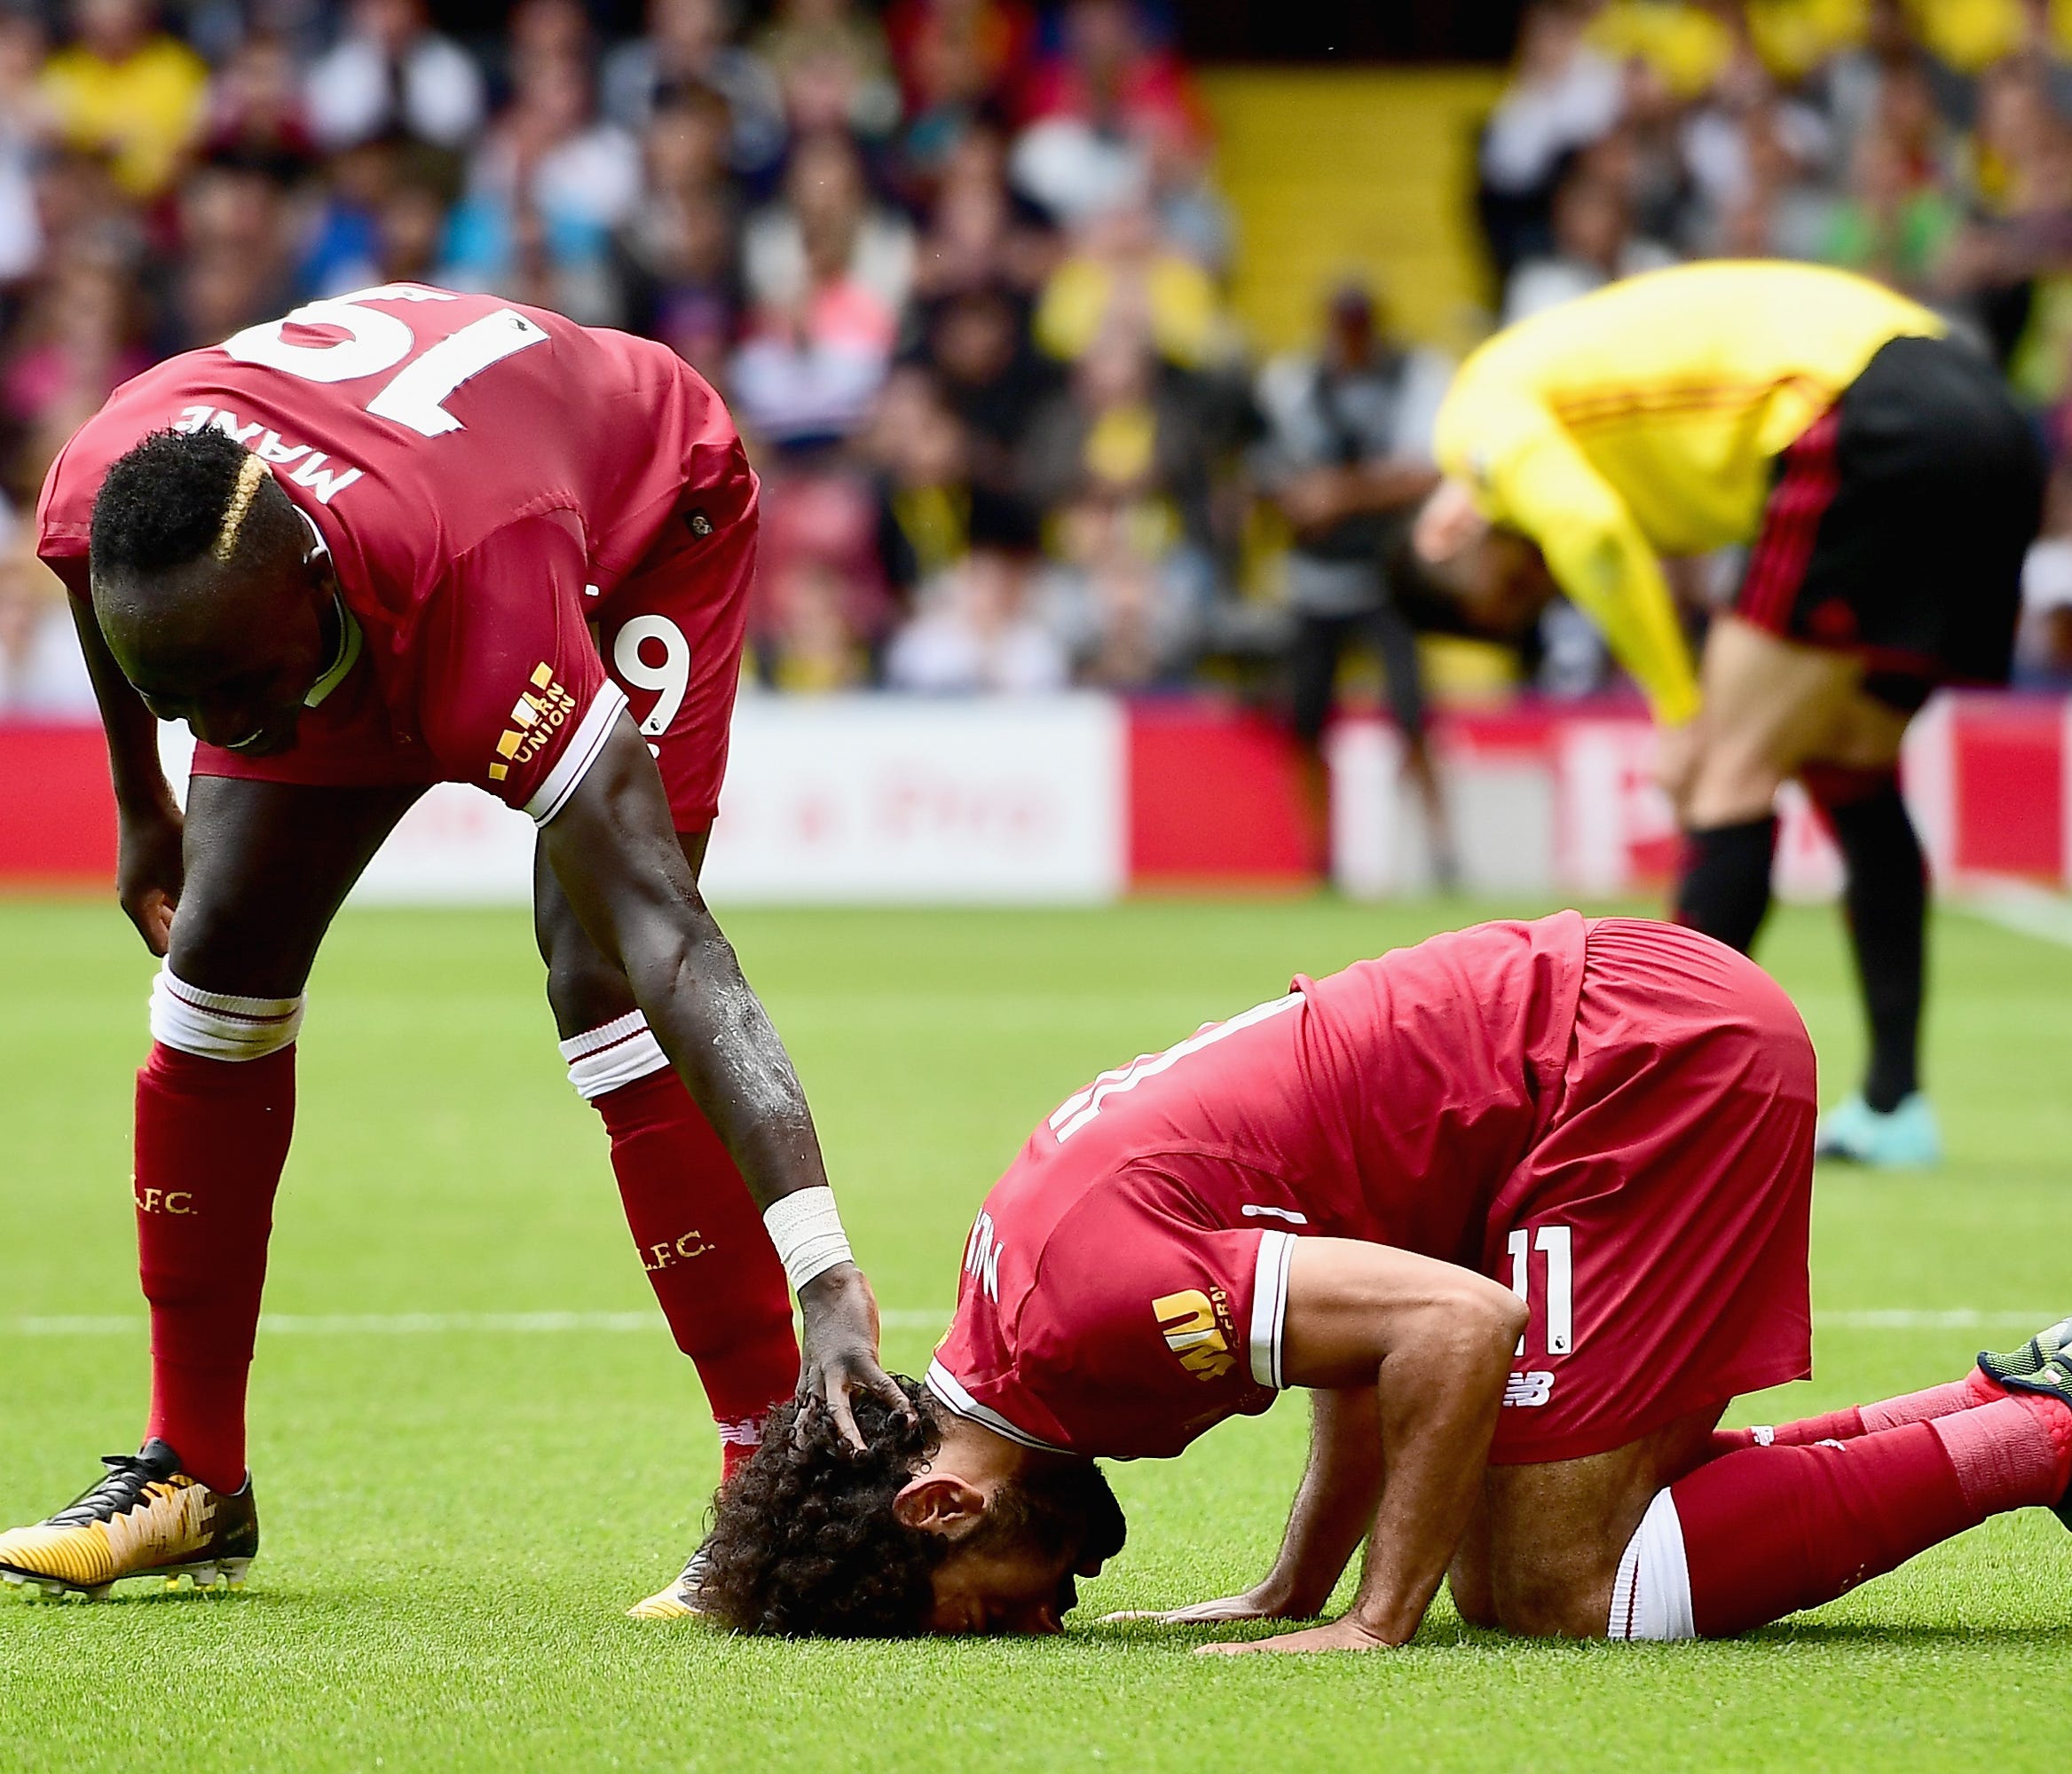 WATFORD, ENGLAND - AUGUST 12: Mohamed Salah of Liverpool celebrates scoring his sides third goal with Sadio Mane of Liverpool during the Premier League match between Watford and Liverpool at Vicarage Road on August 12, 2017 in Watford, England.  (Pho